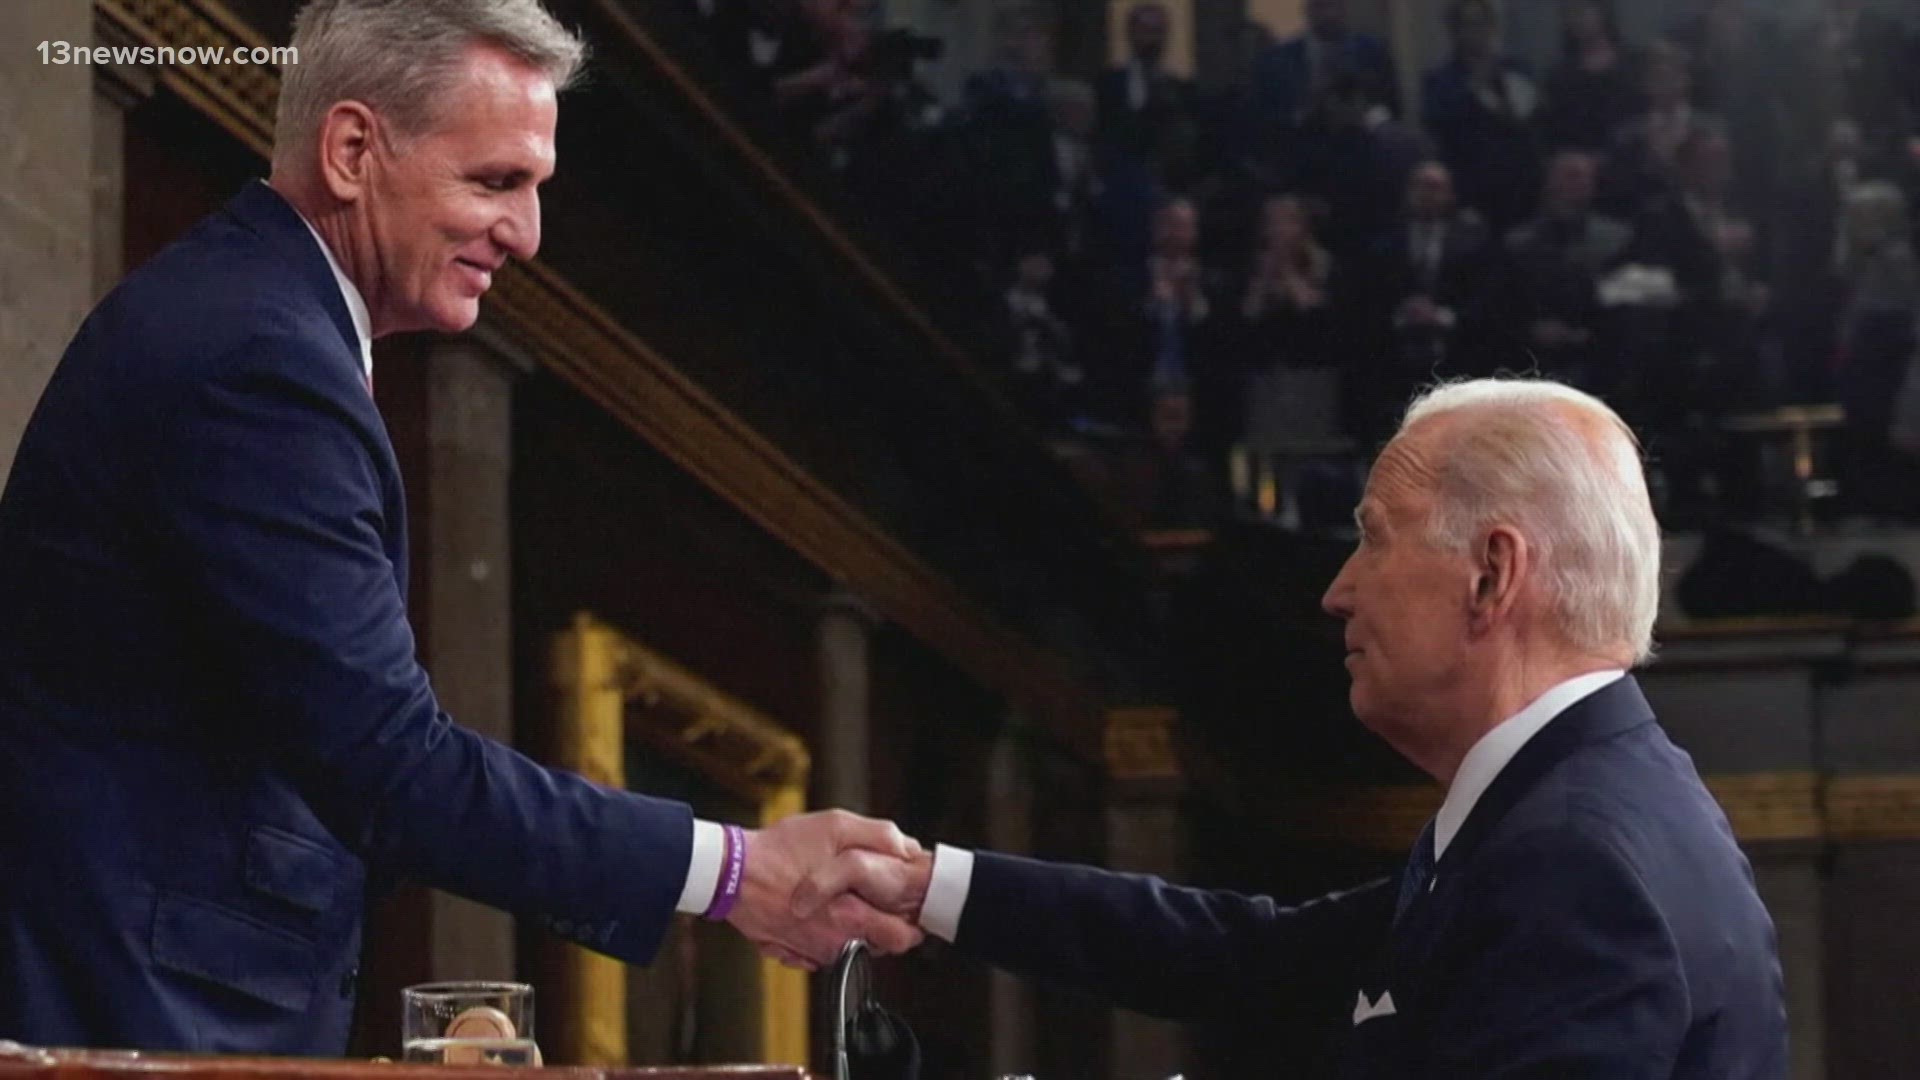 The House of Representatives has approved President Joe Biden and House Speaker Kevin McCarthy's debt deal with overwhelming bipartisan support.